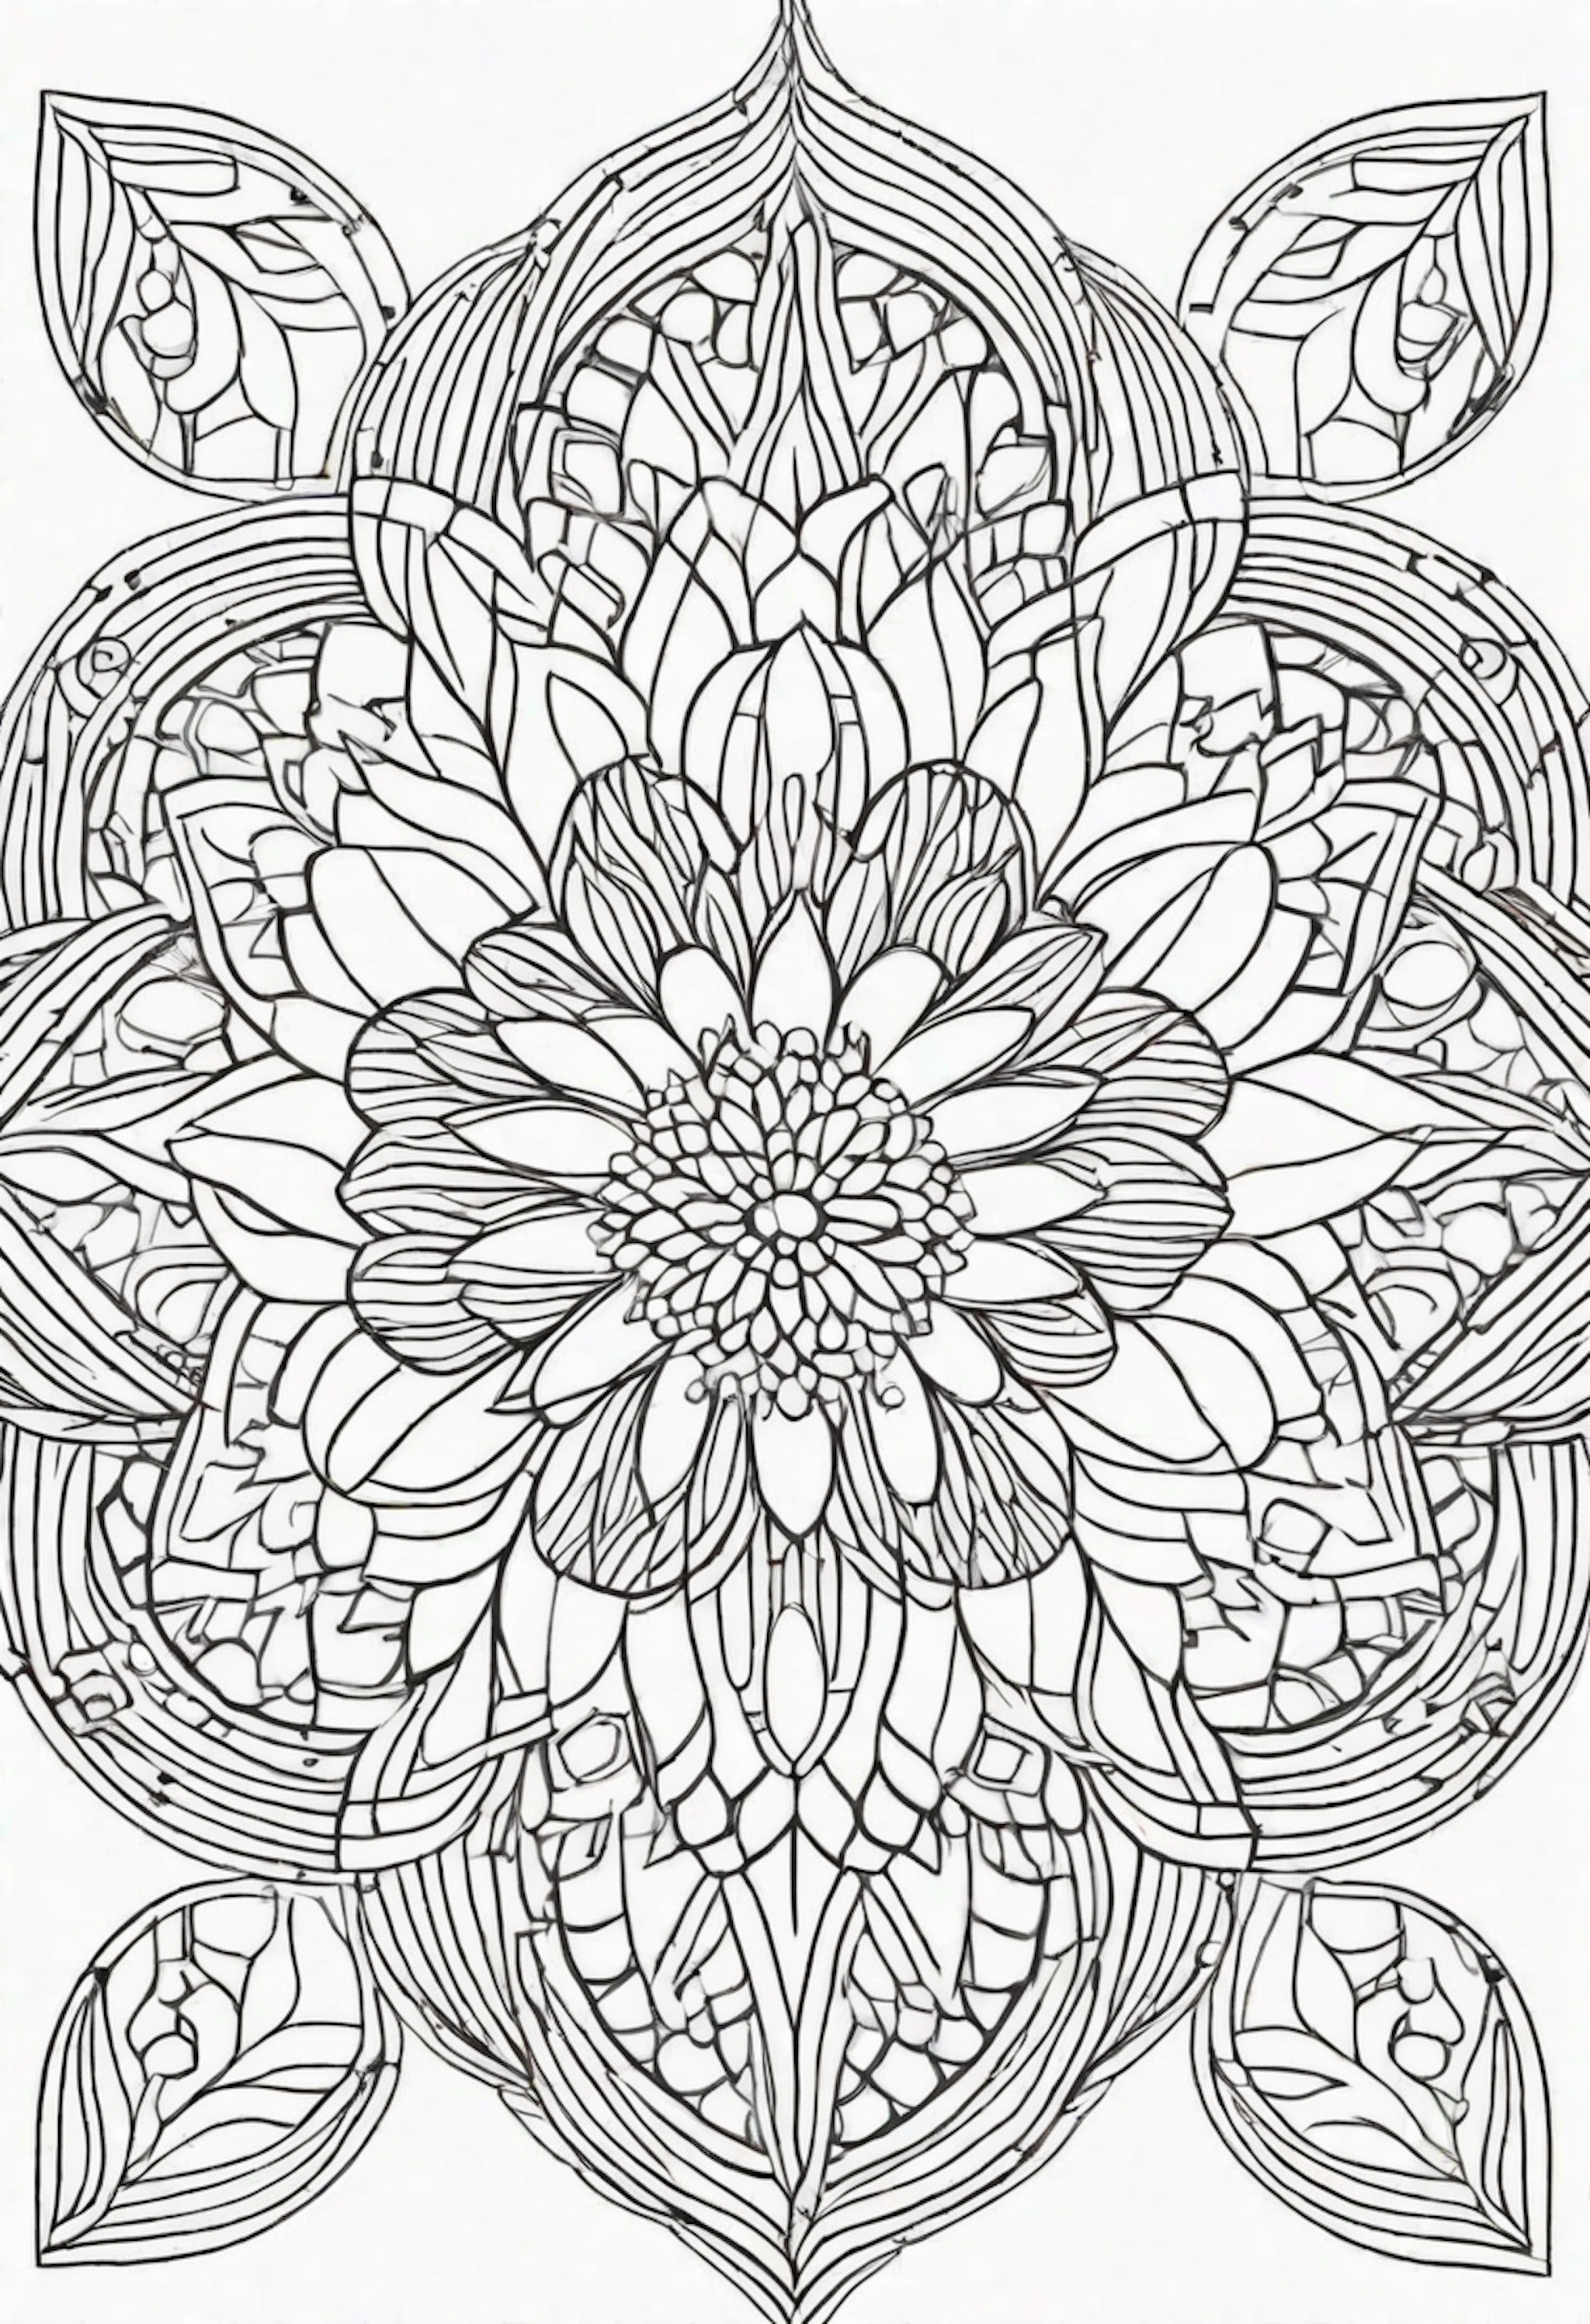 A coloring page for 1 Adult coloring pages